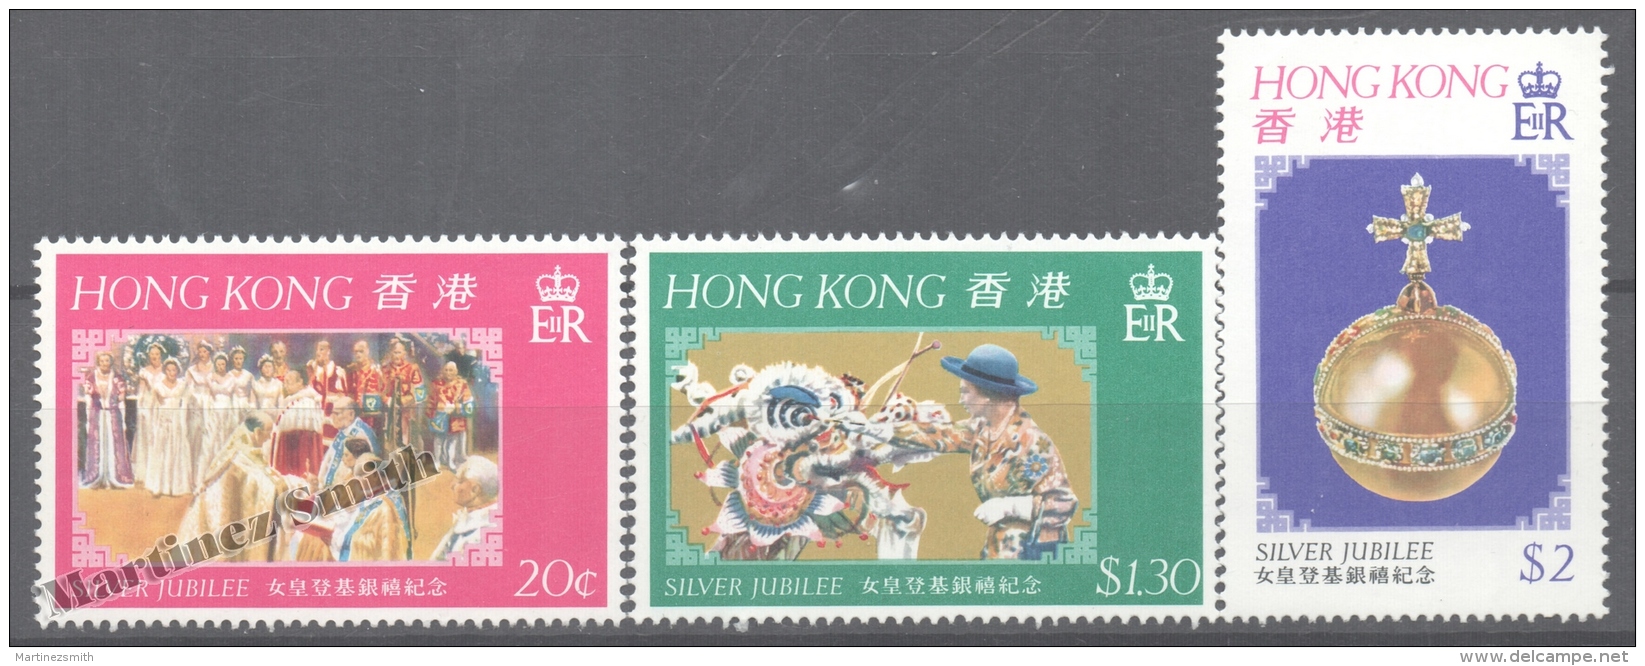 Hong Kong 1977 Yvert 325-27, 25th Anniversary Of The Queen Elizabeth II Coronation - MNH - Unused Stamps